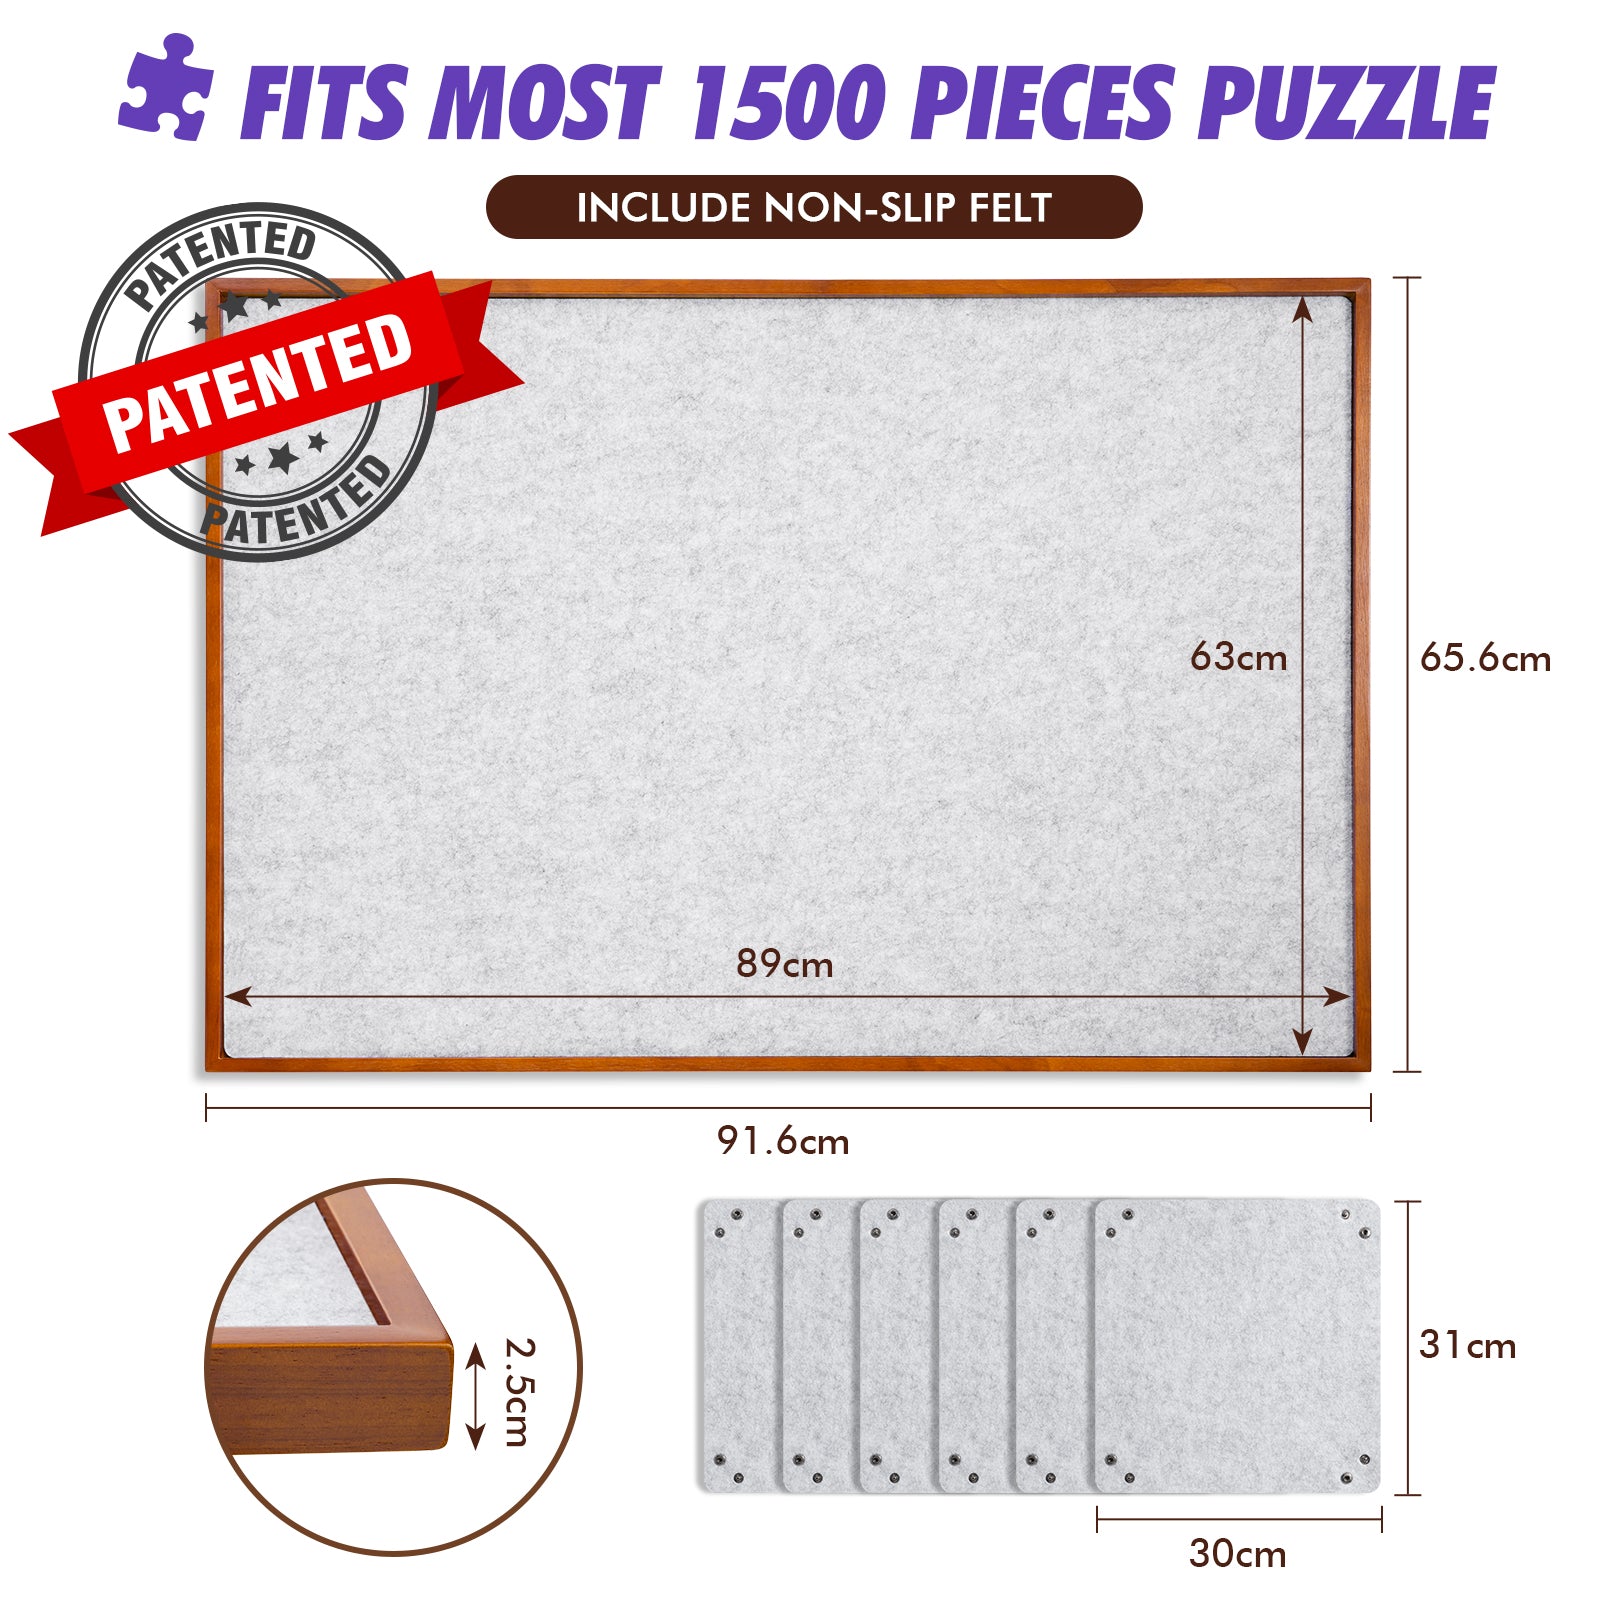 Patented】Adjustable Height & Tilt Jigsaw Puzzle Board for 1500 pcs, P –  ikkle Home